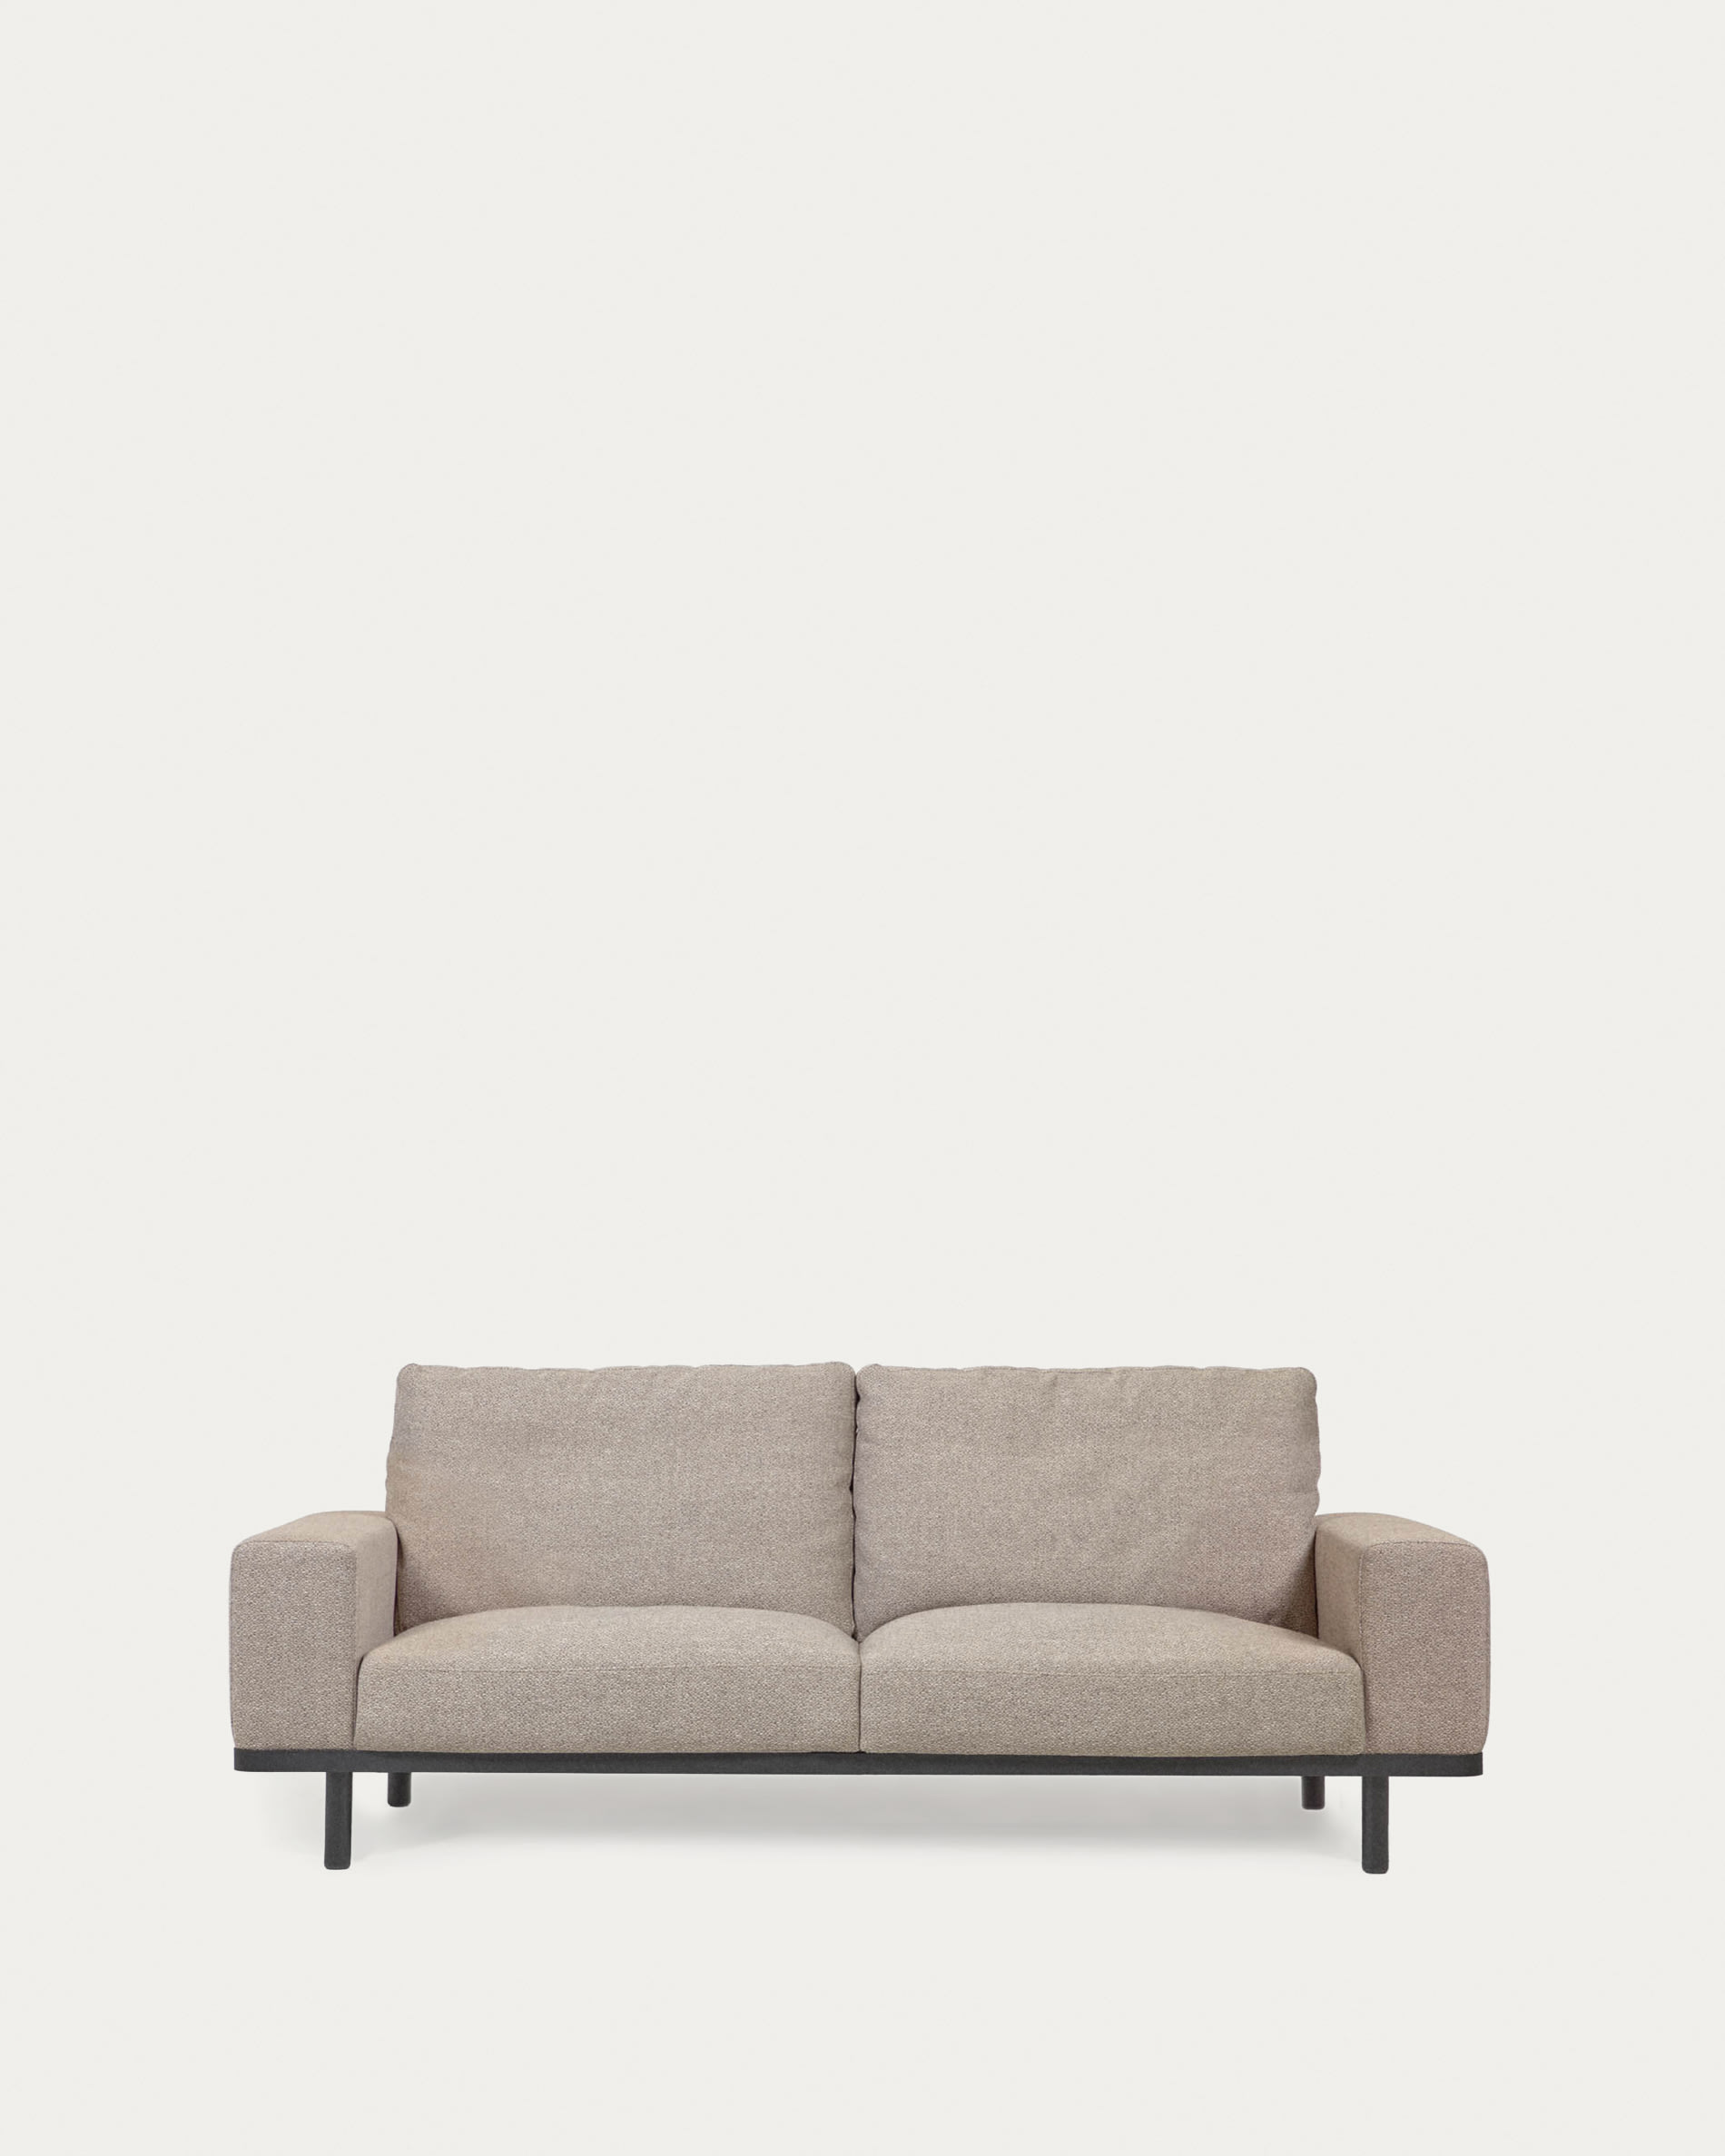 Noa 3 seater sofa in beige with dark finish legs 230 cm | Kave Home